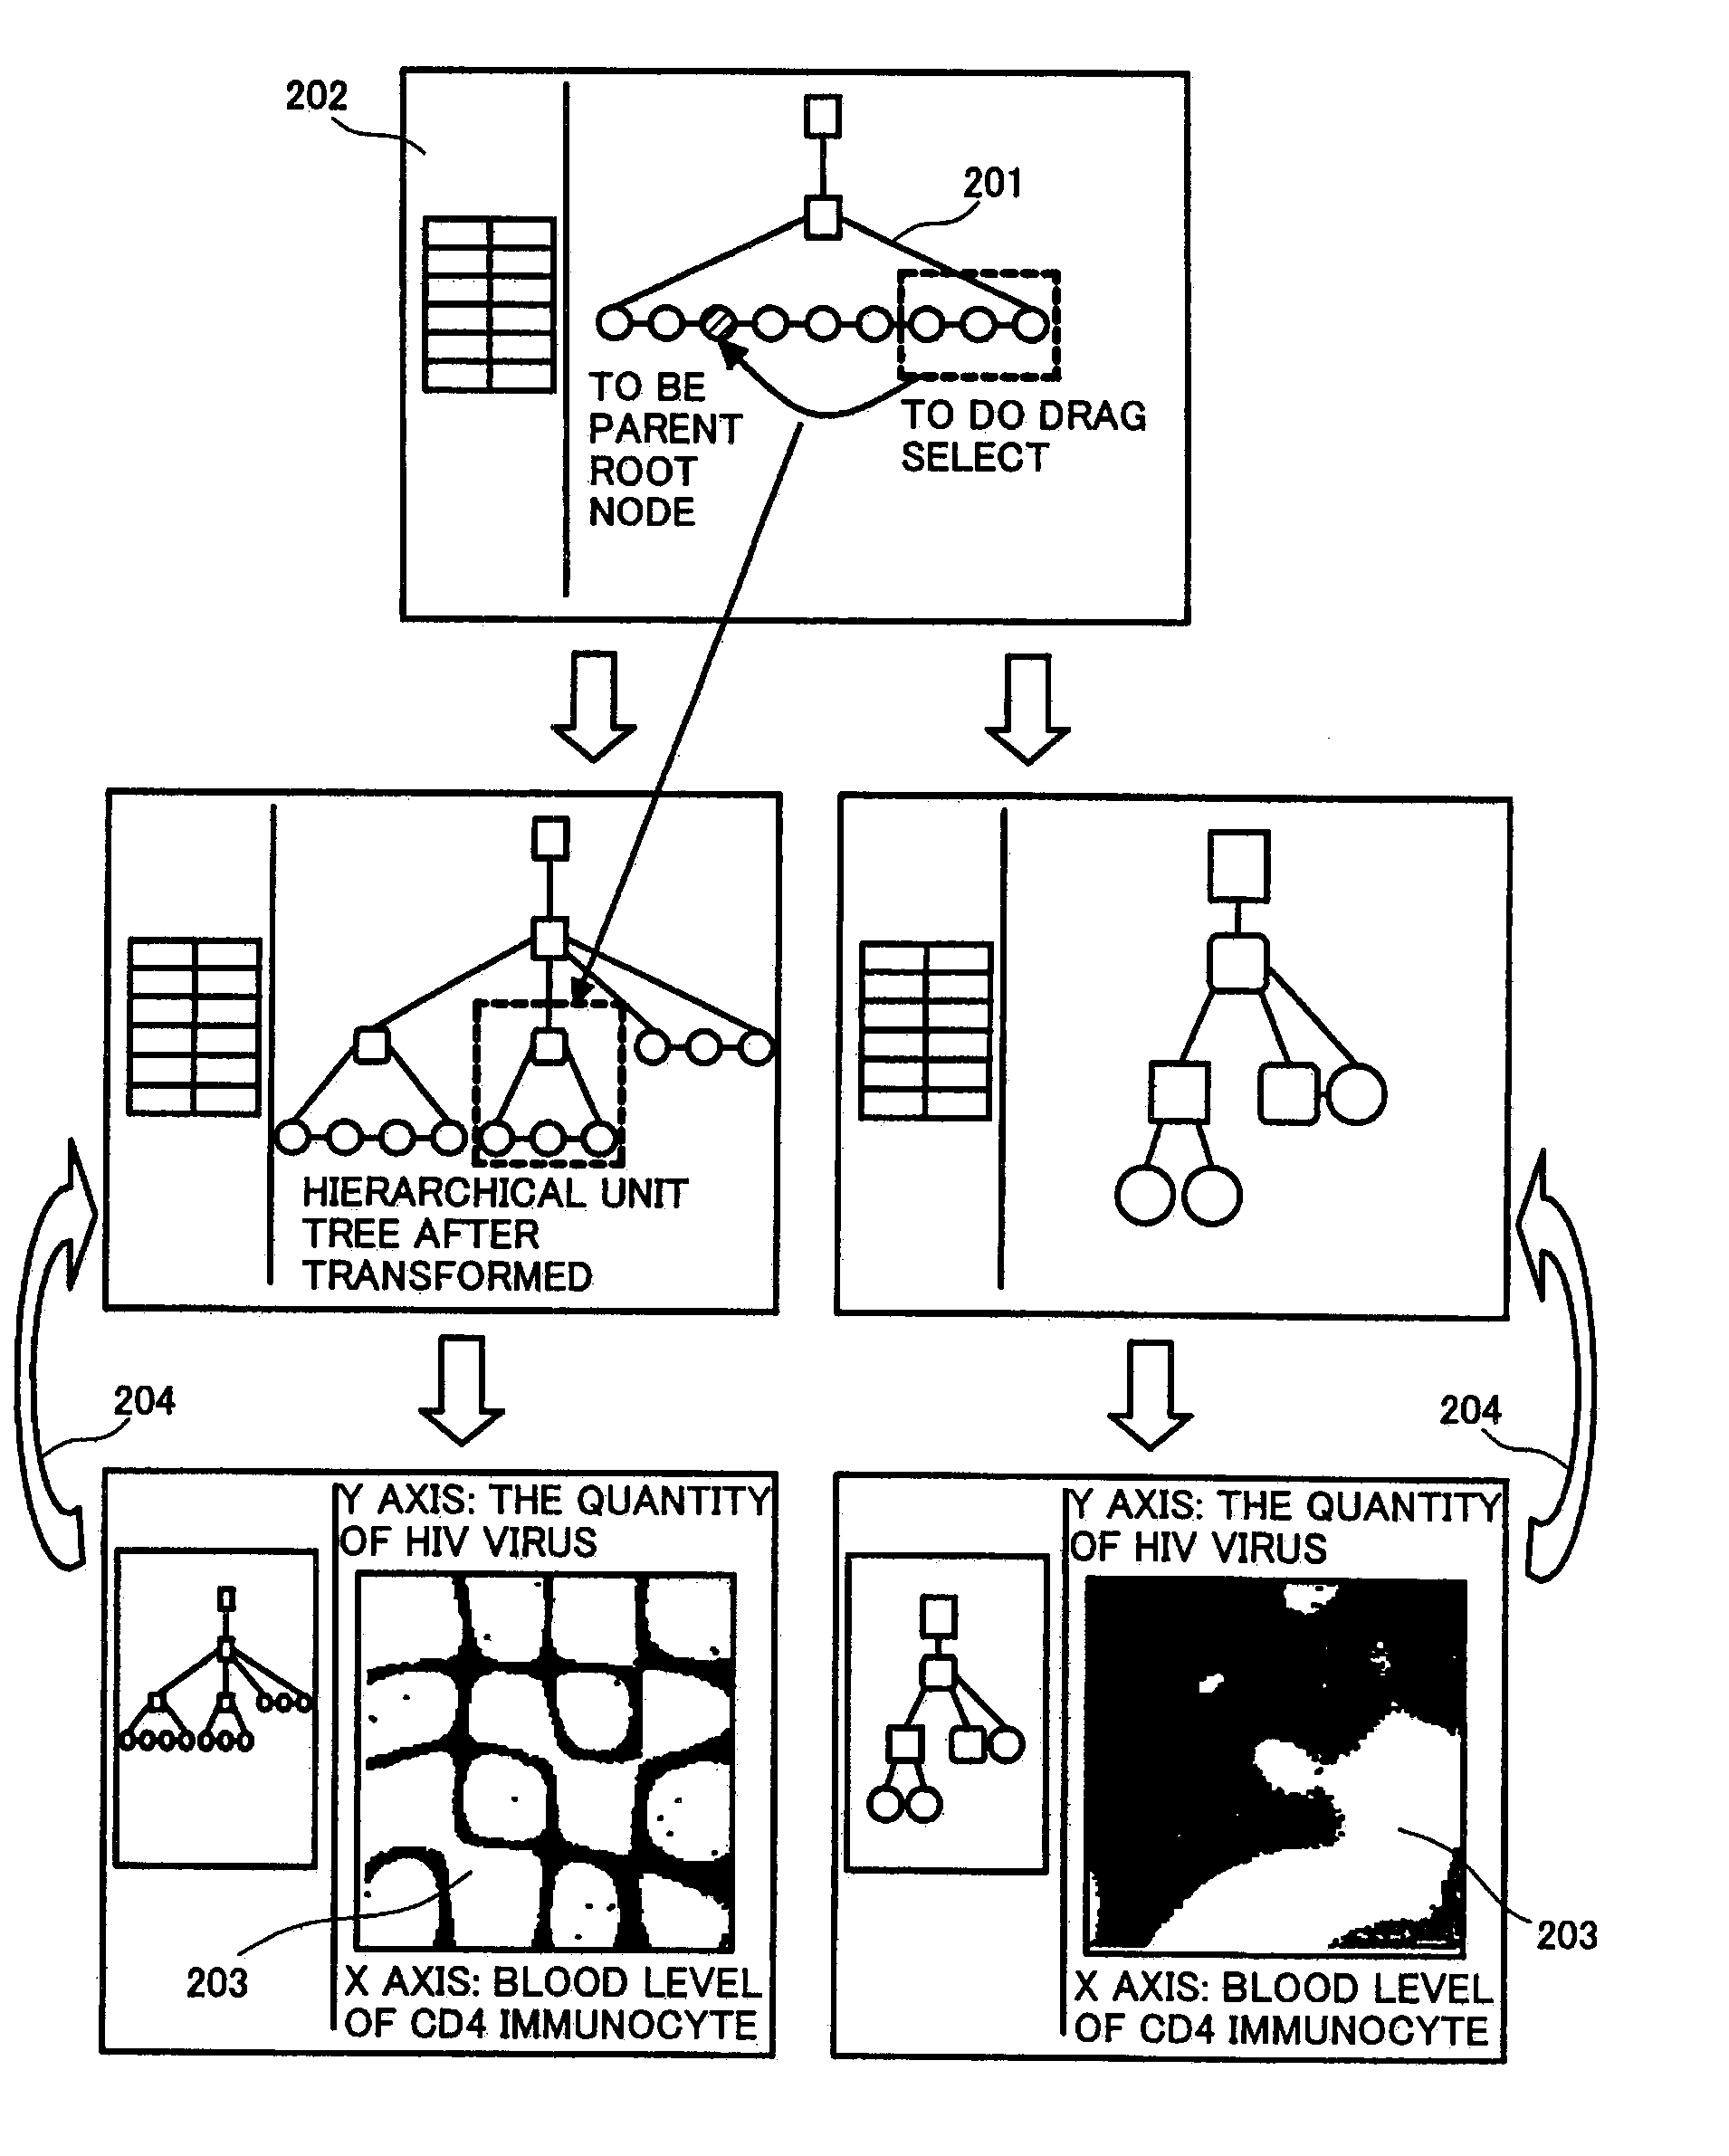 Production and preprocessing system for data mining